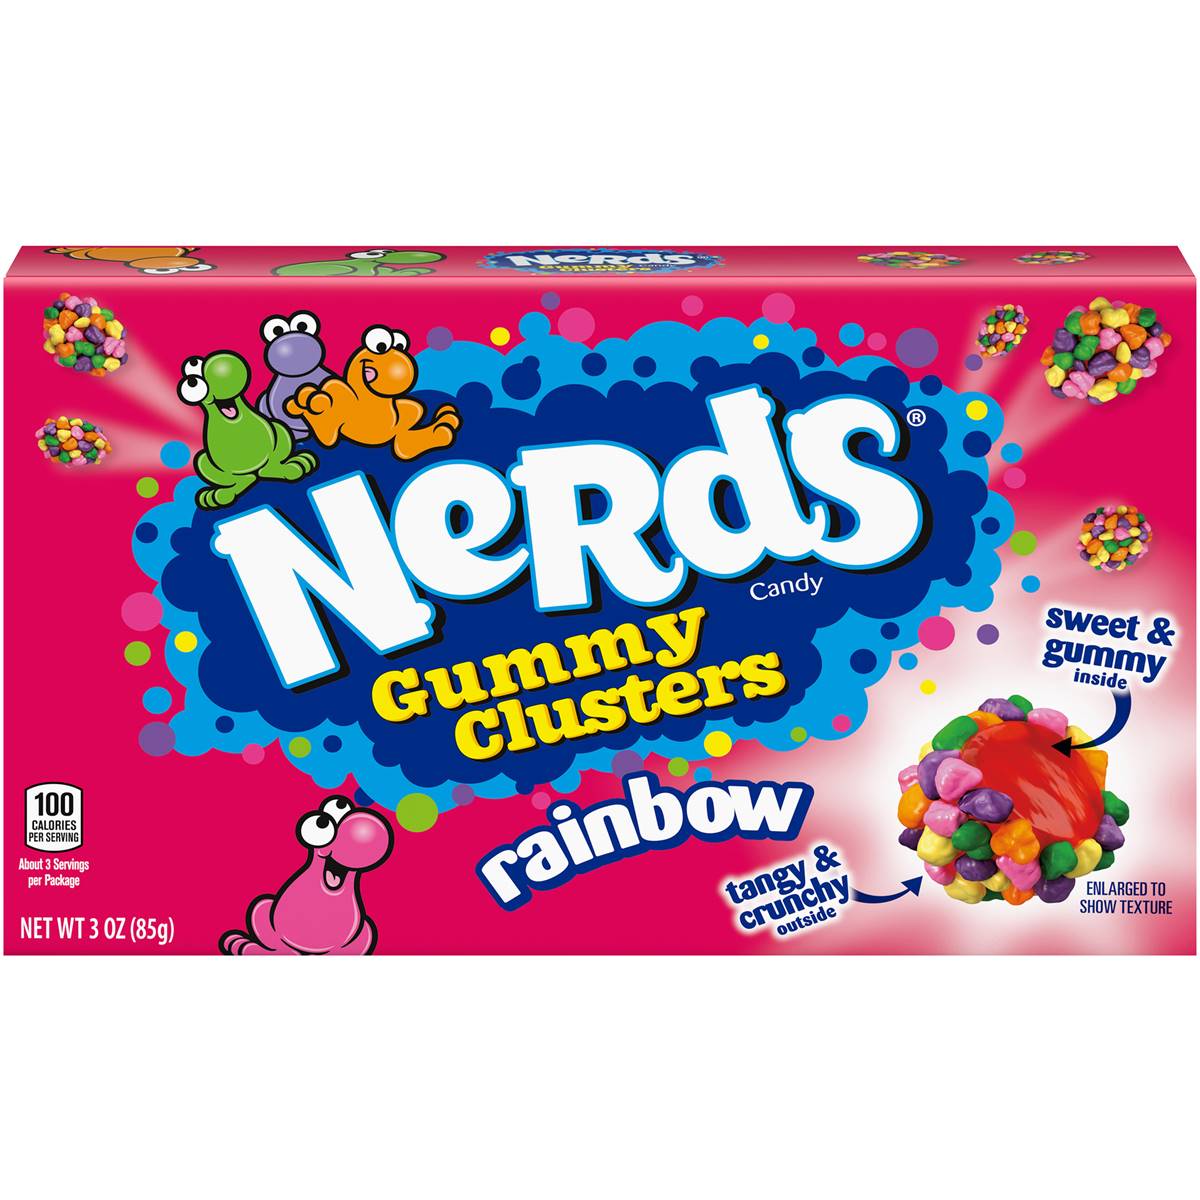 Calories in Nerds Gummy Clusters Rainbow Tangy & Crunchy